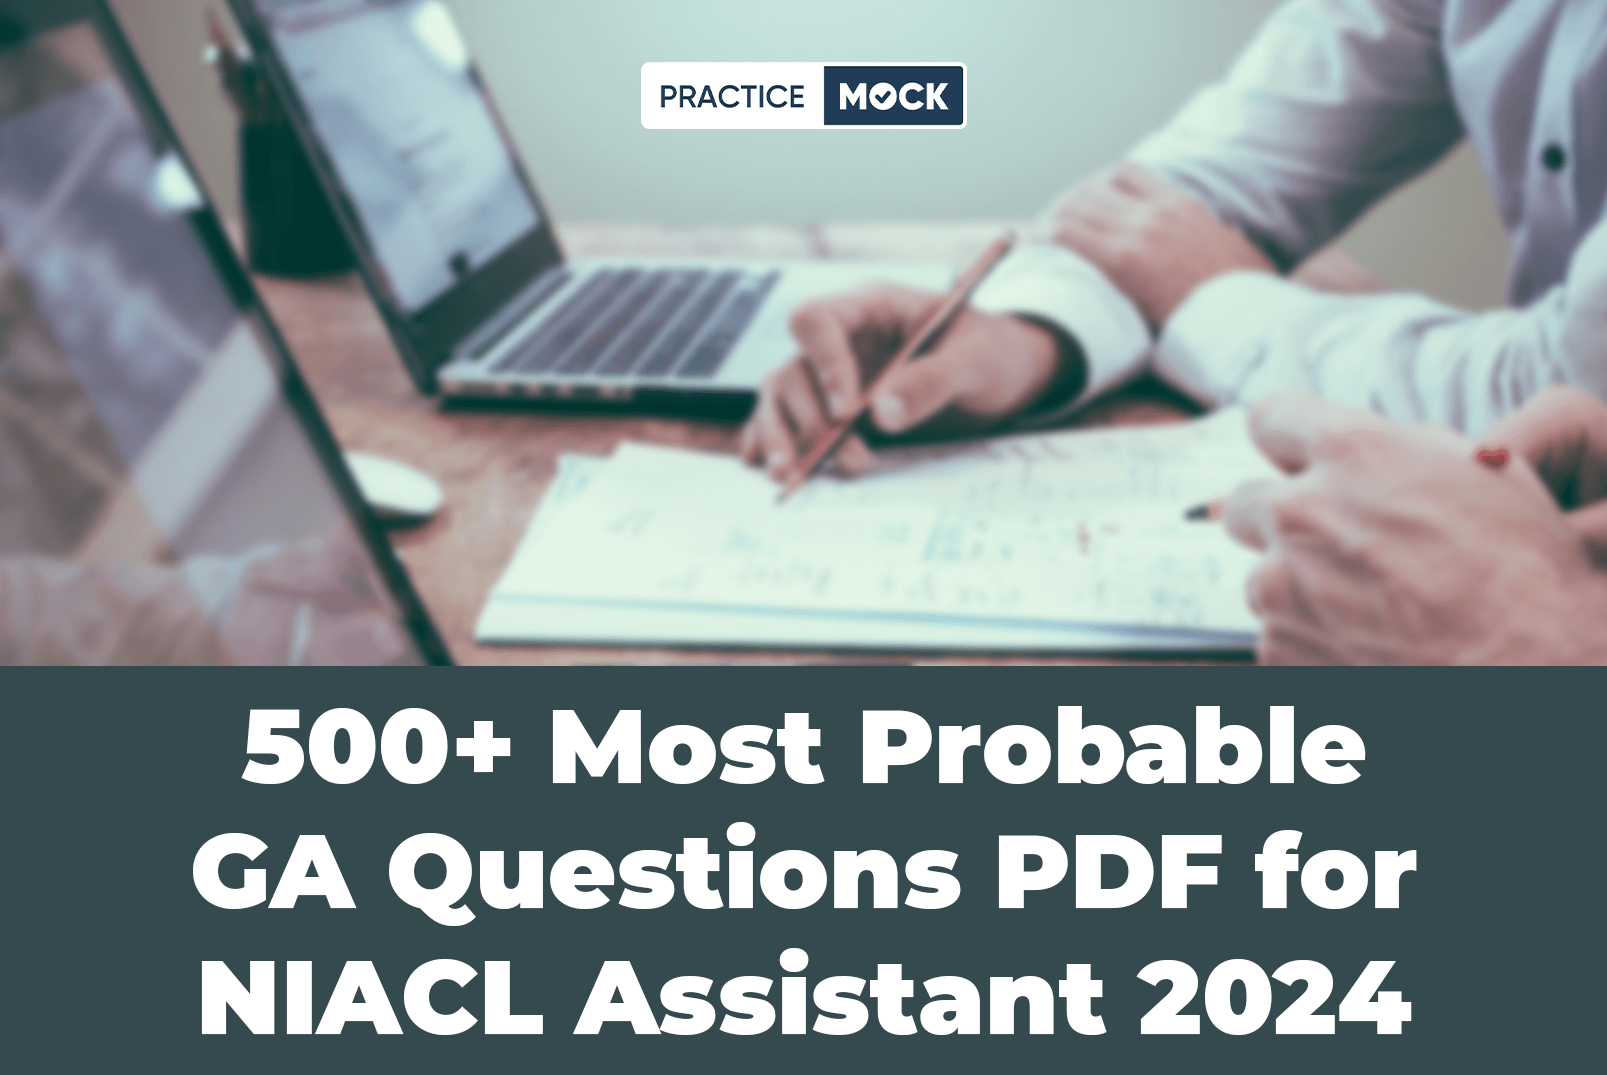 500+ Most Probable GA Questions PDF for NIACL Assistant 2024